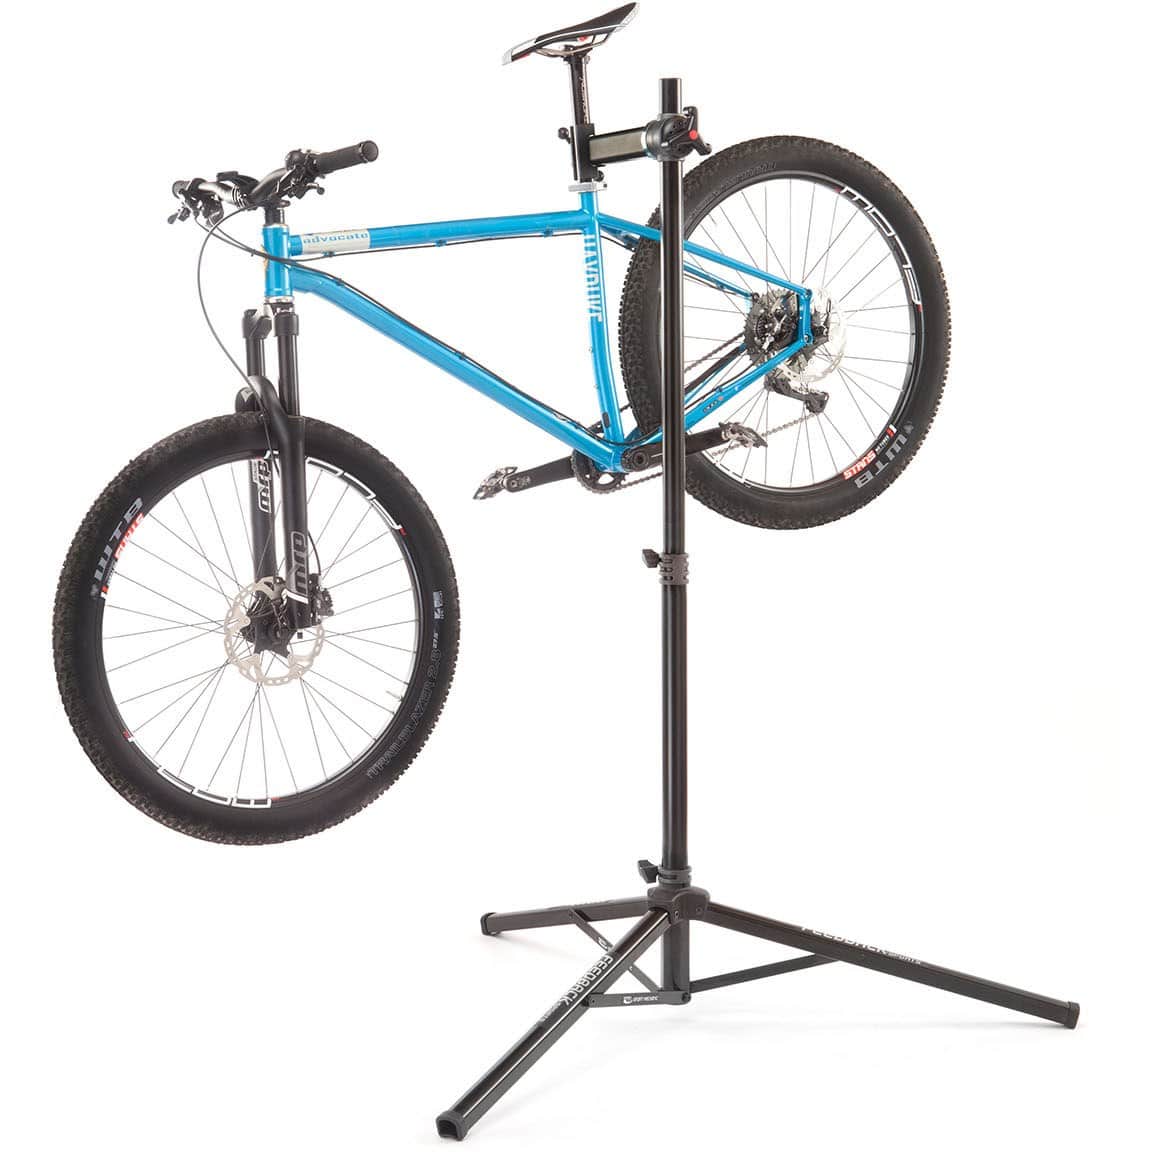 For any mountain bike maintenance secure your bike using a bike stand, especially if you need to work on the chain.